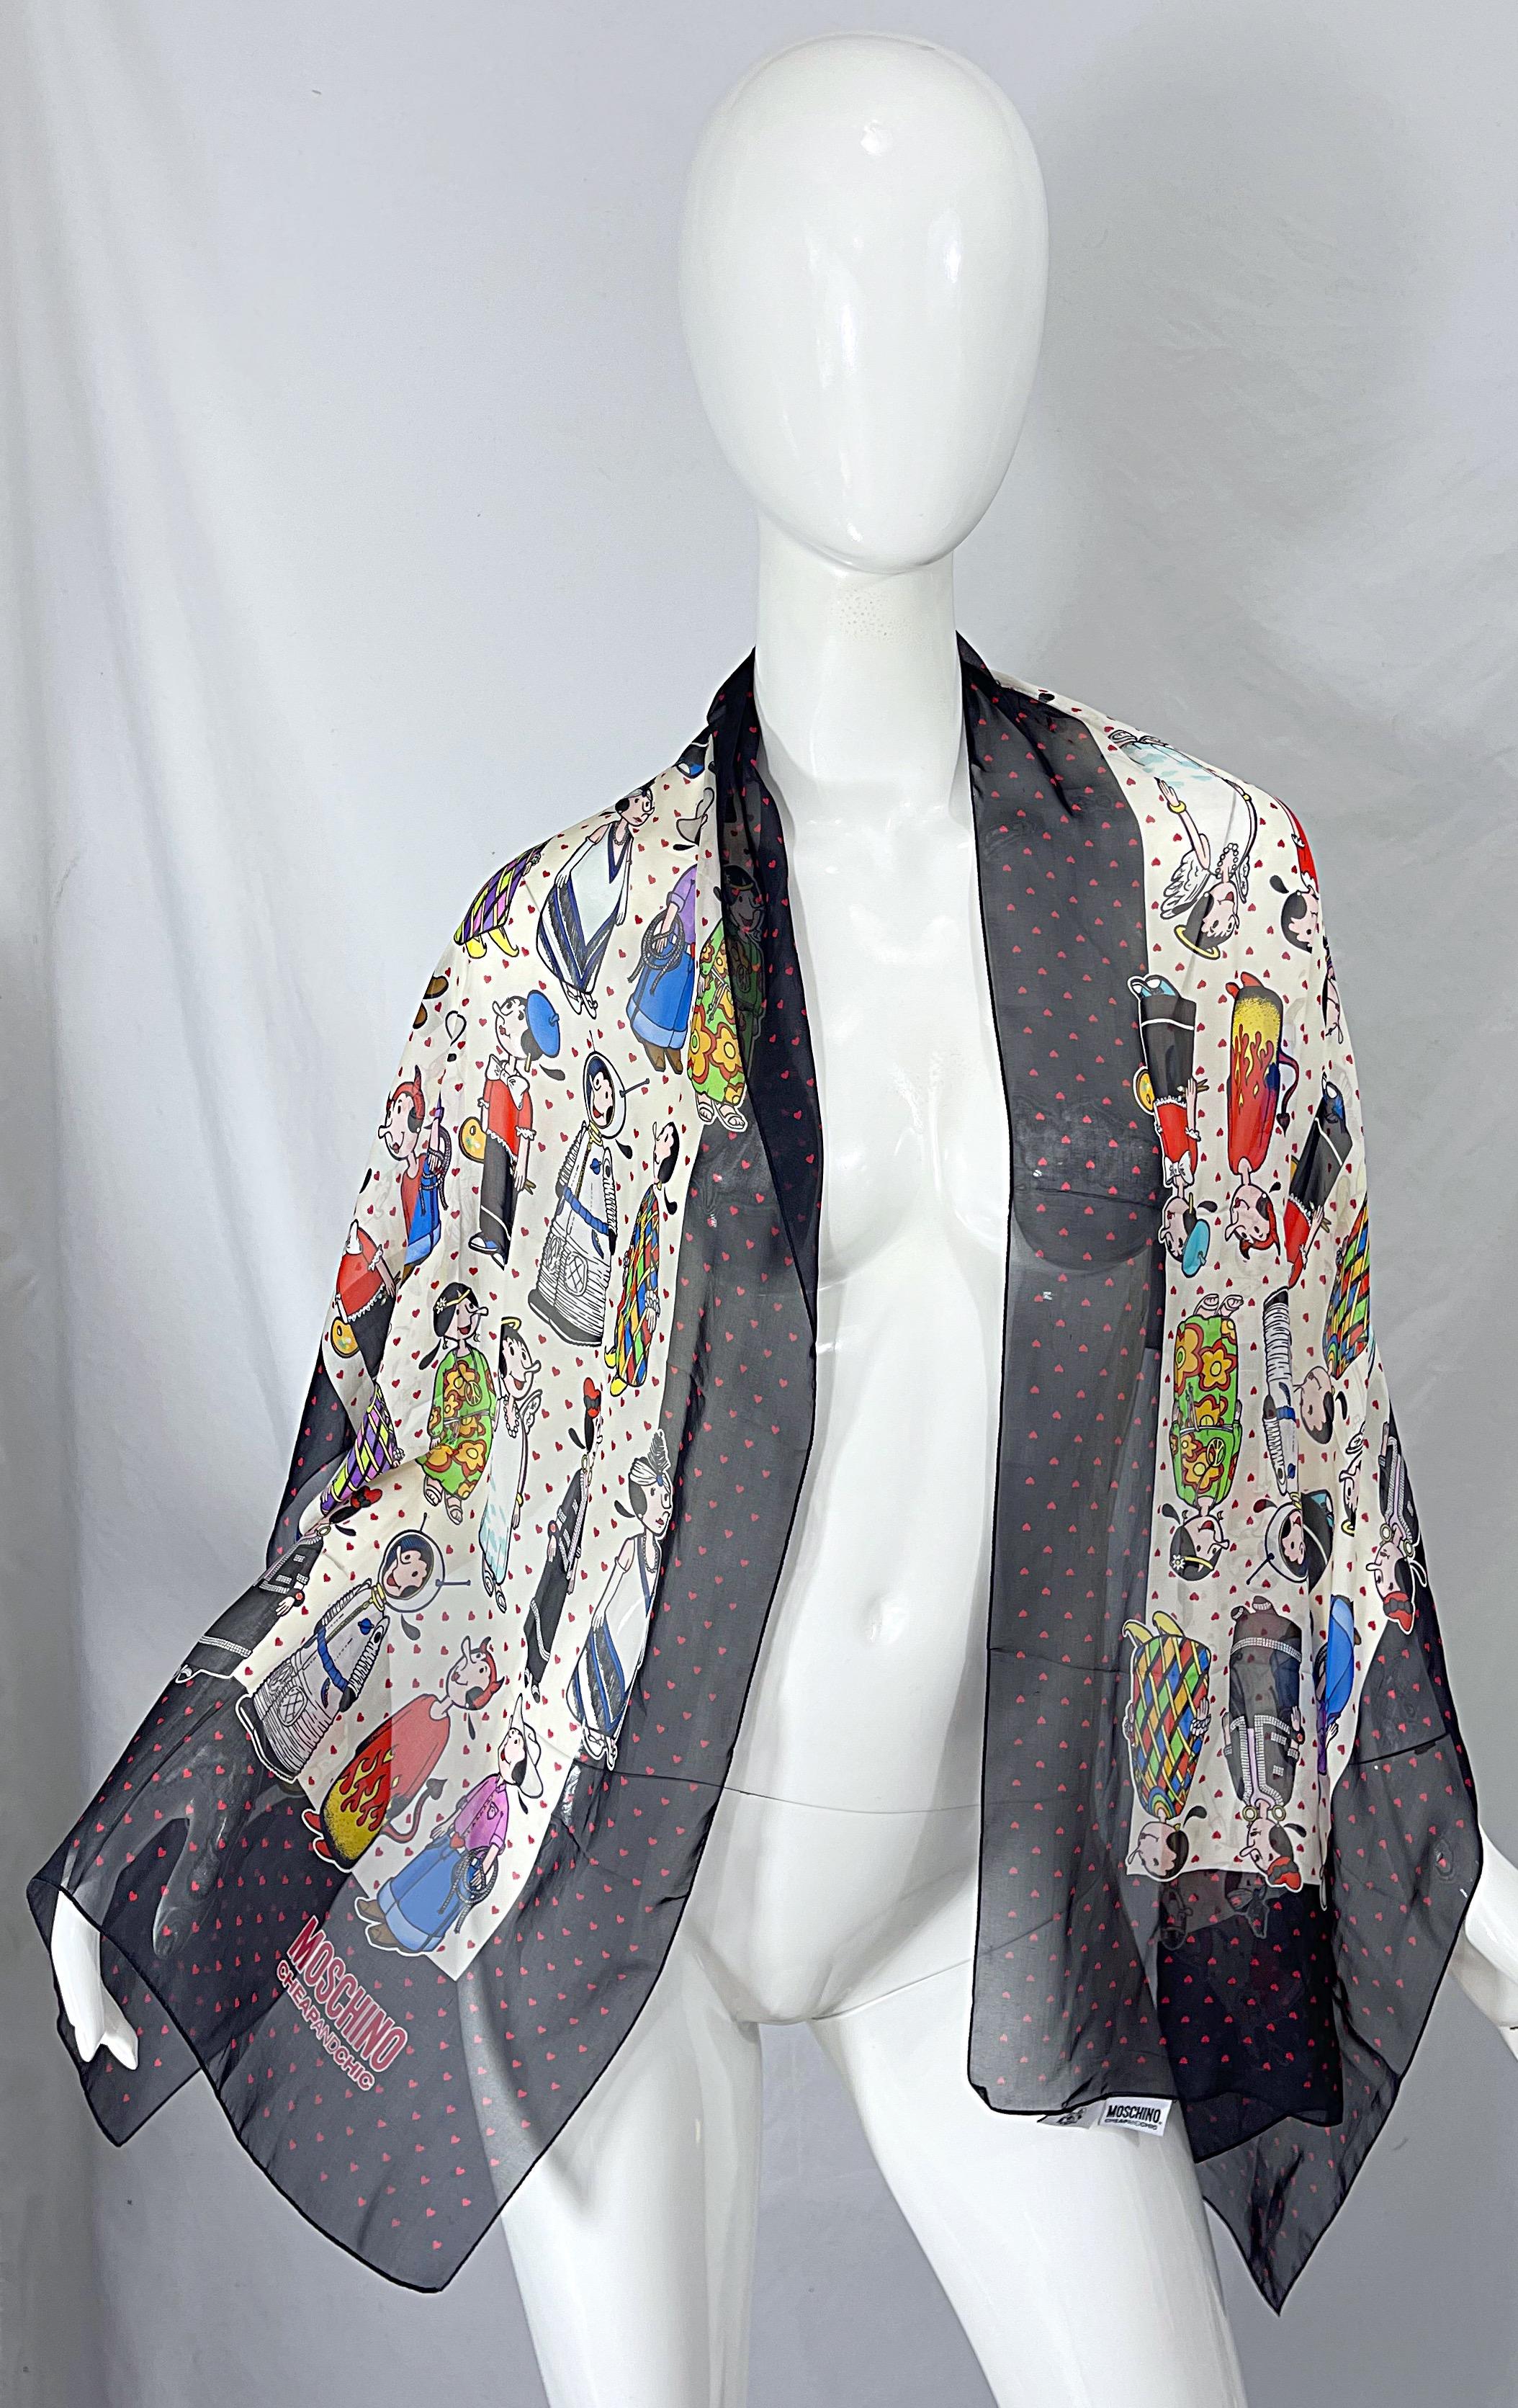 Amazing late 90s vintage MOSCHINO Cheap & Chic Popeye / Olive Oyl novelty print silk chiffon semi sheer long scarf / shawl ! Features Olive Oyl in different costumes. Vibrant colors of red, orange, yellow, green, blue, purple, pink, black and white.